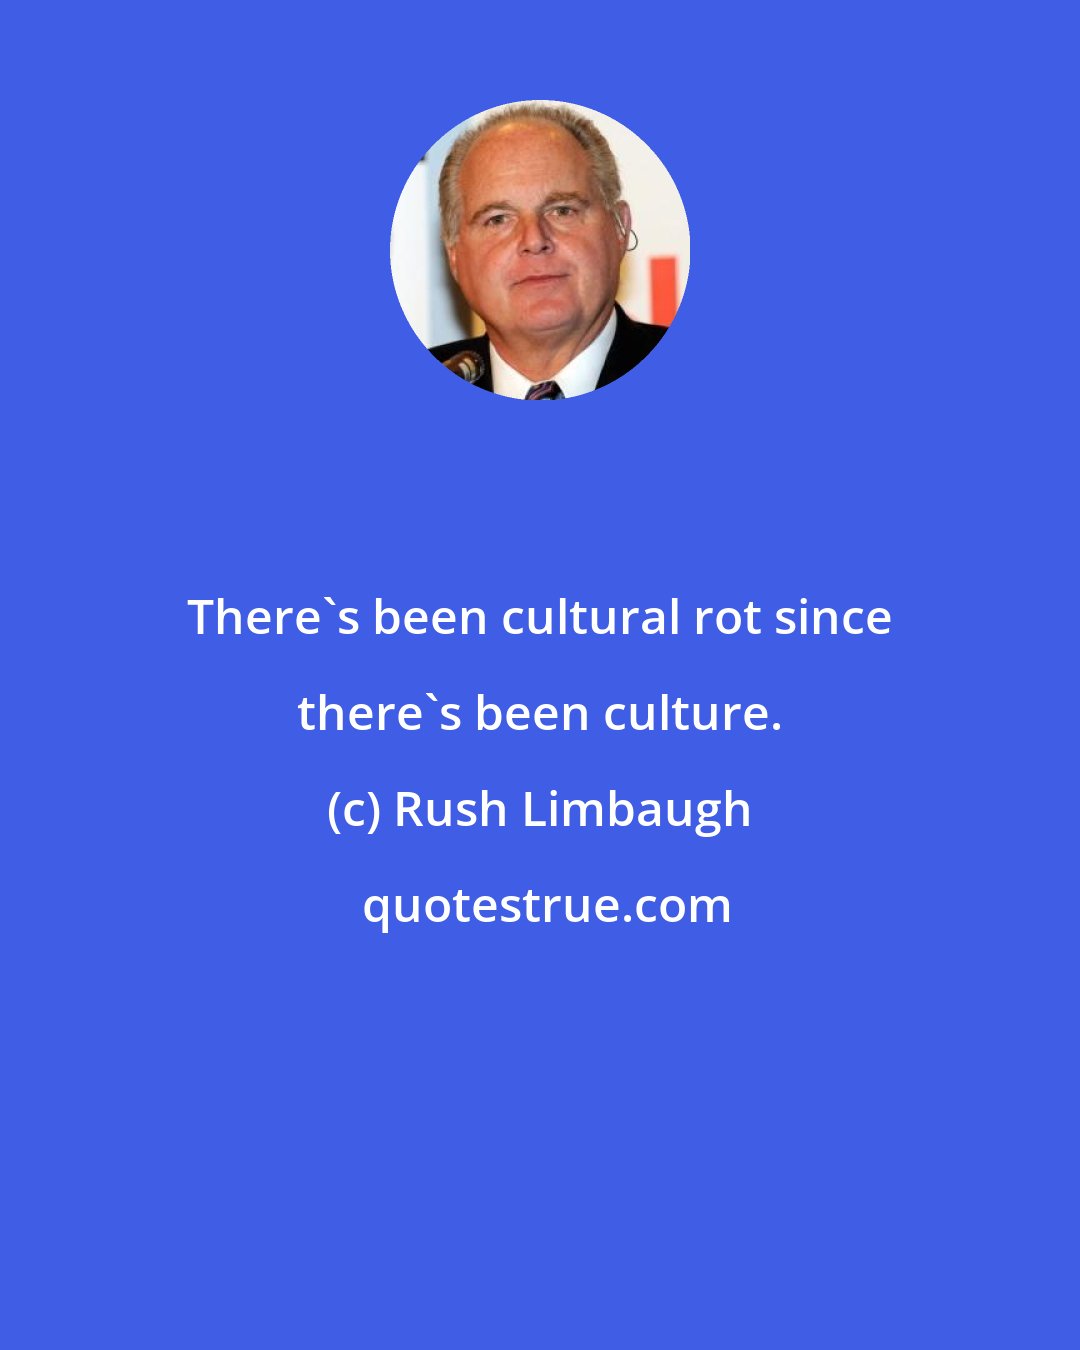 Rush Limbaugh: There's been cultural rot since there's been culture.